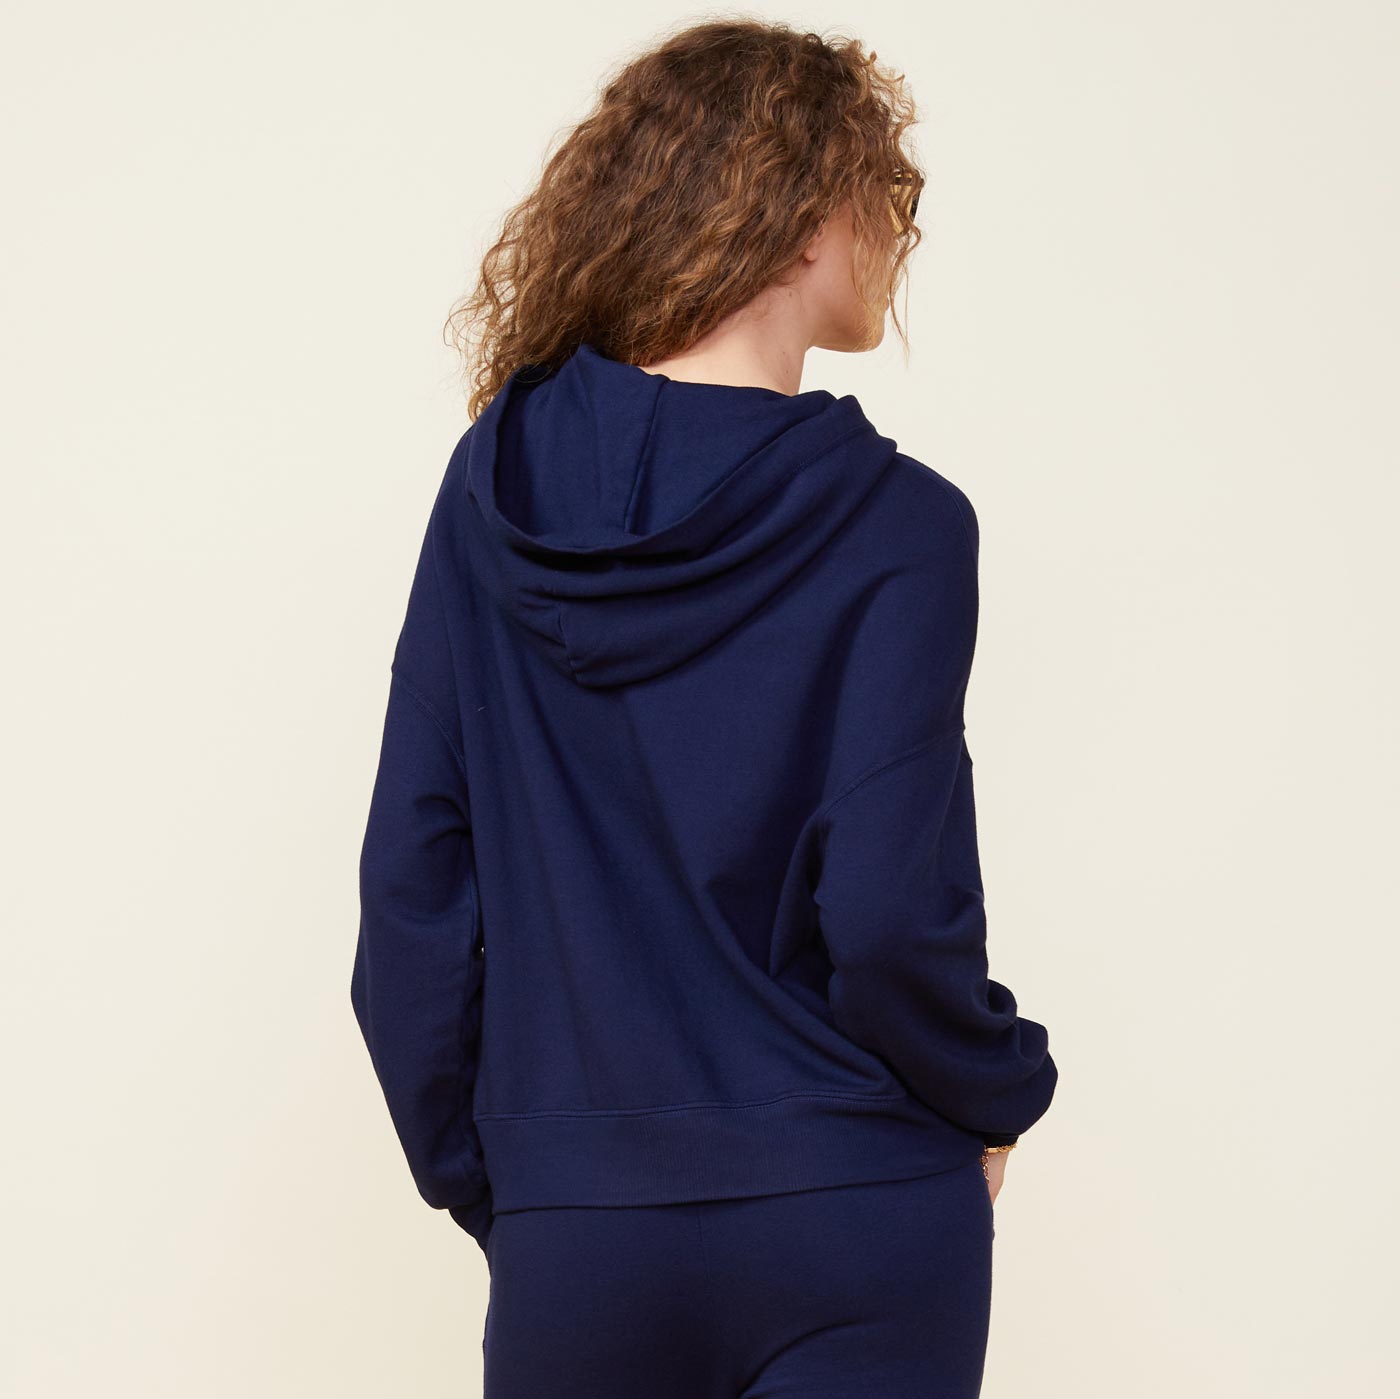 Back view of model wearing the supersoft fleece slouchy pullover in navy.